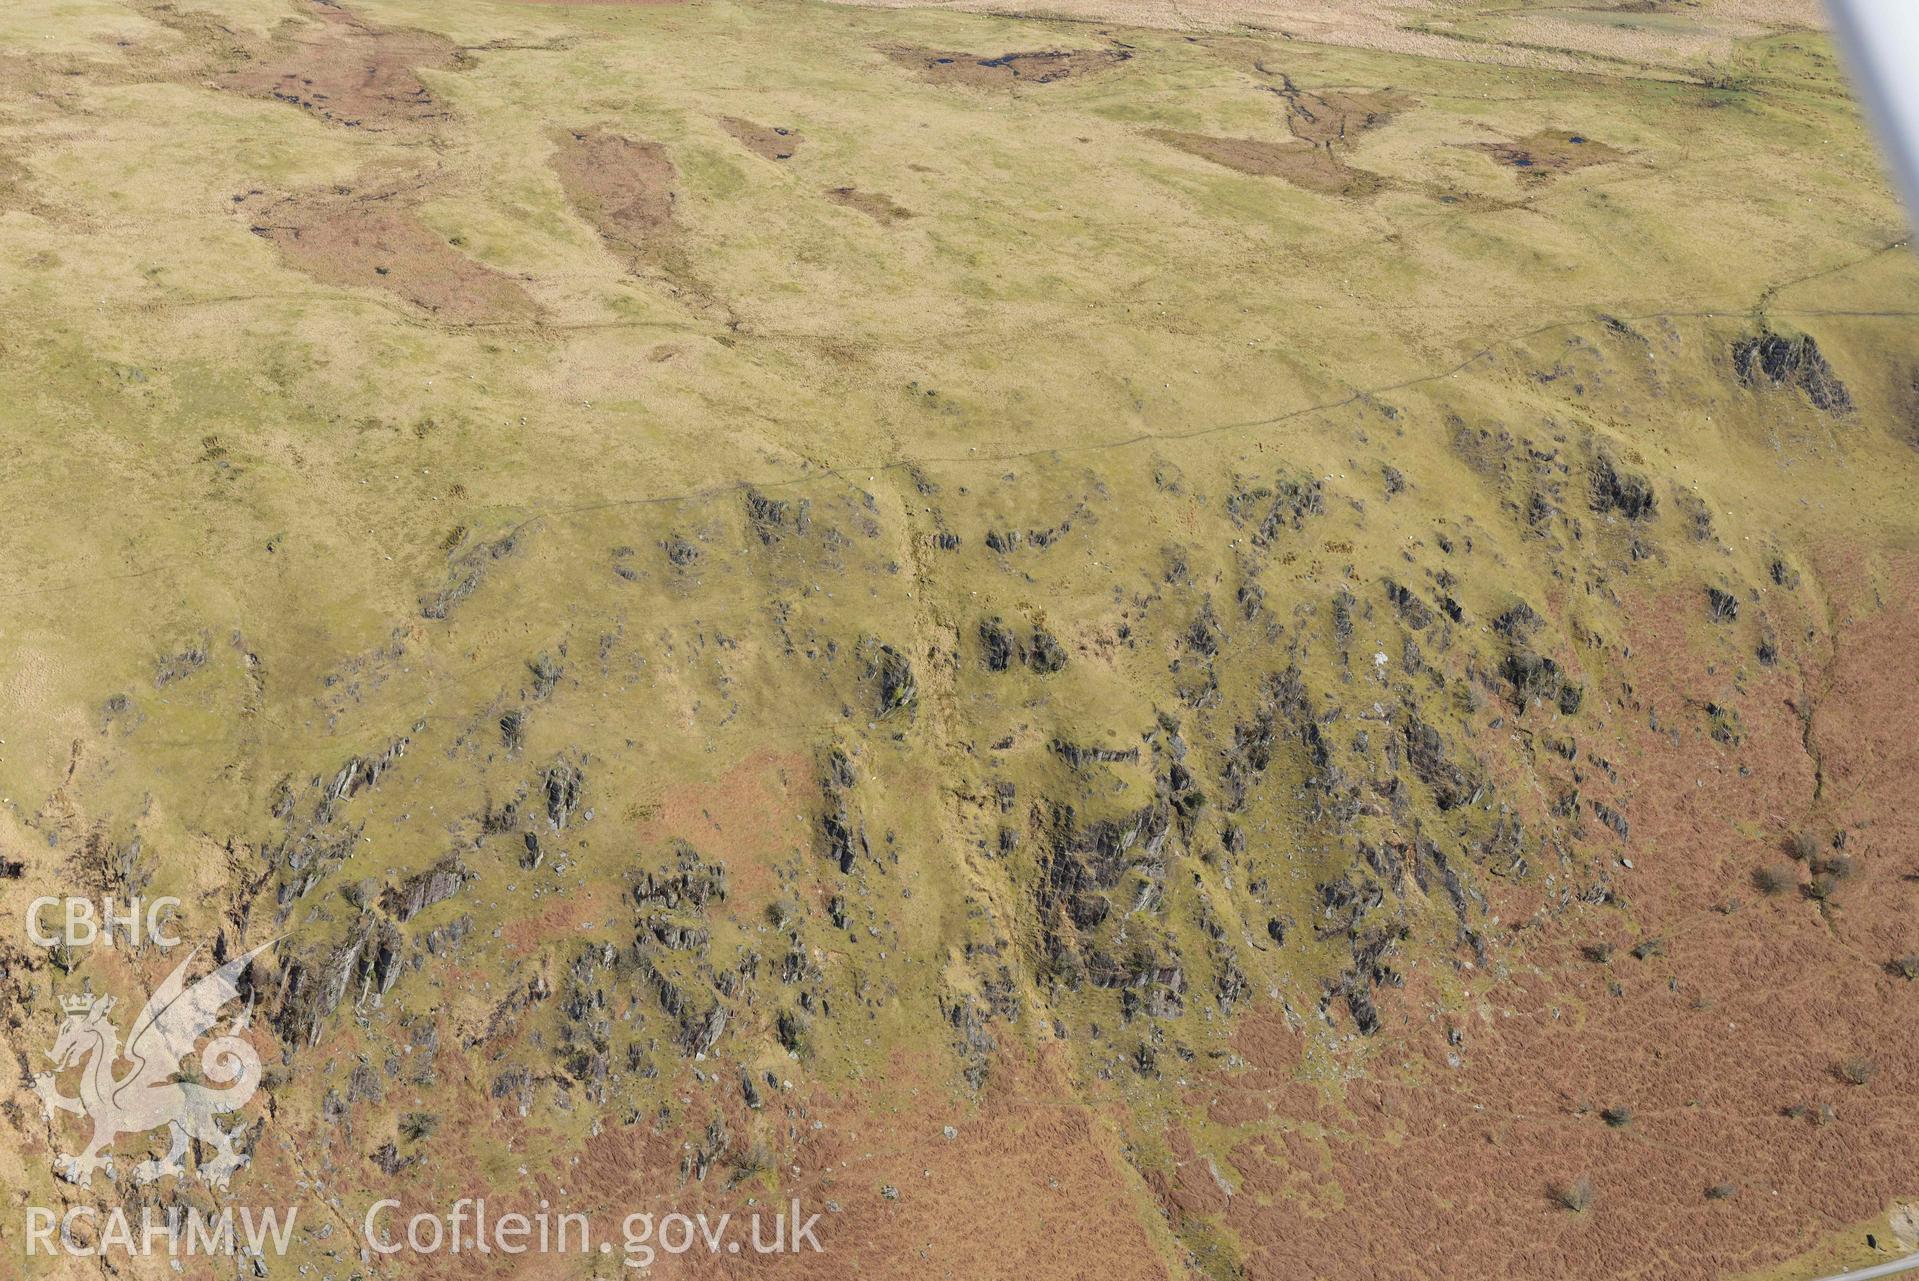 Esgair Irfon cairn, general view of location. Oblique aerial photograph taken during the Royal Commission’s programme of archaeological aerial reconnaissance by Toby Driver on 14 March 2022.